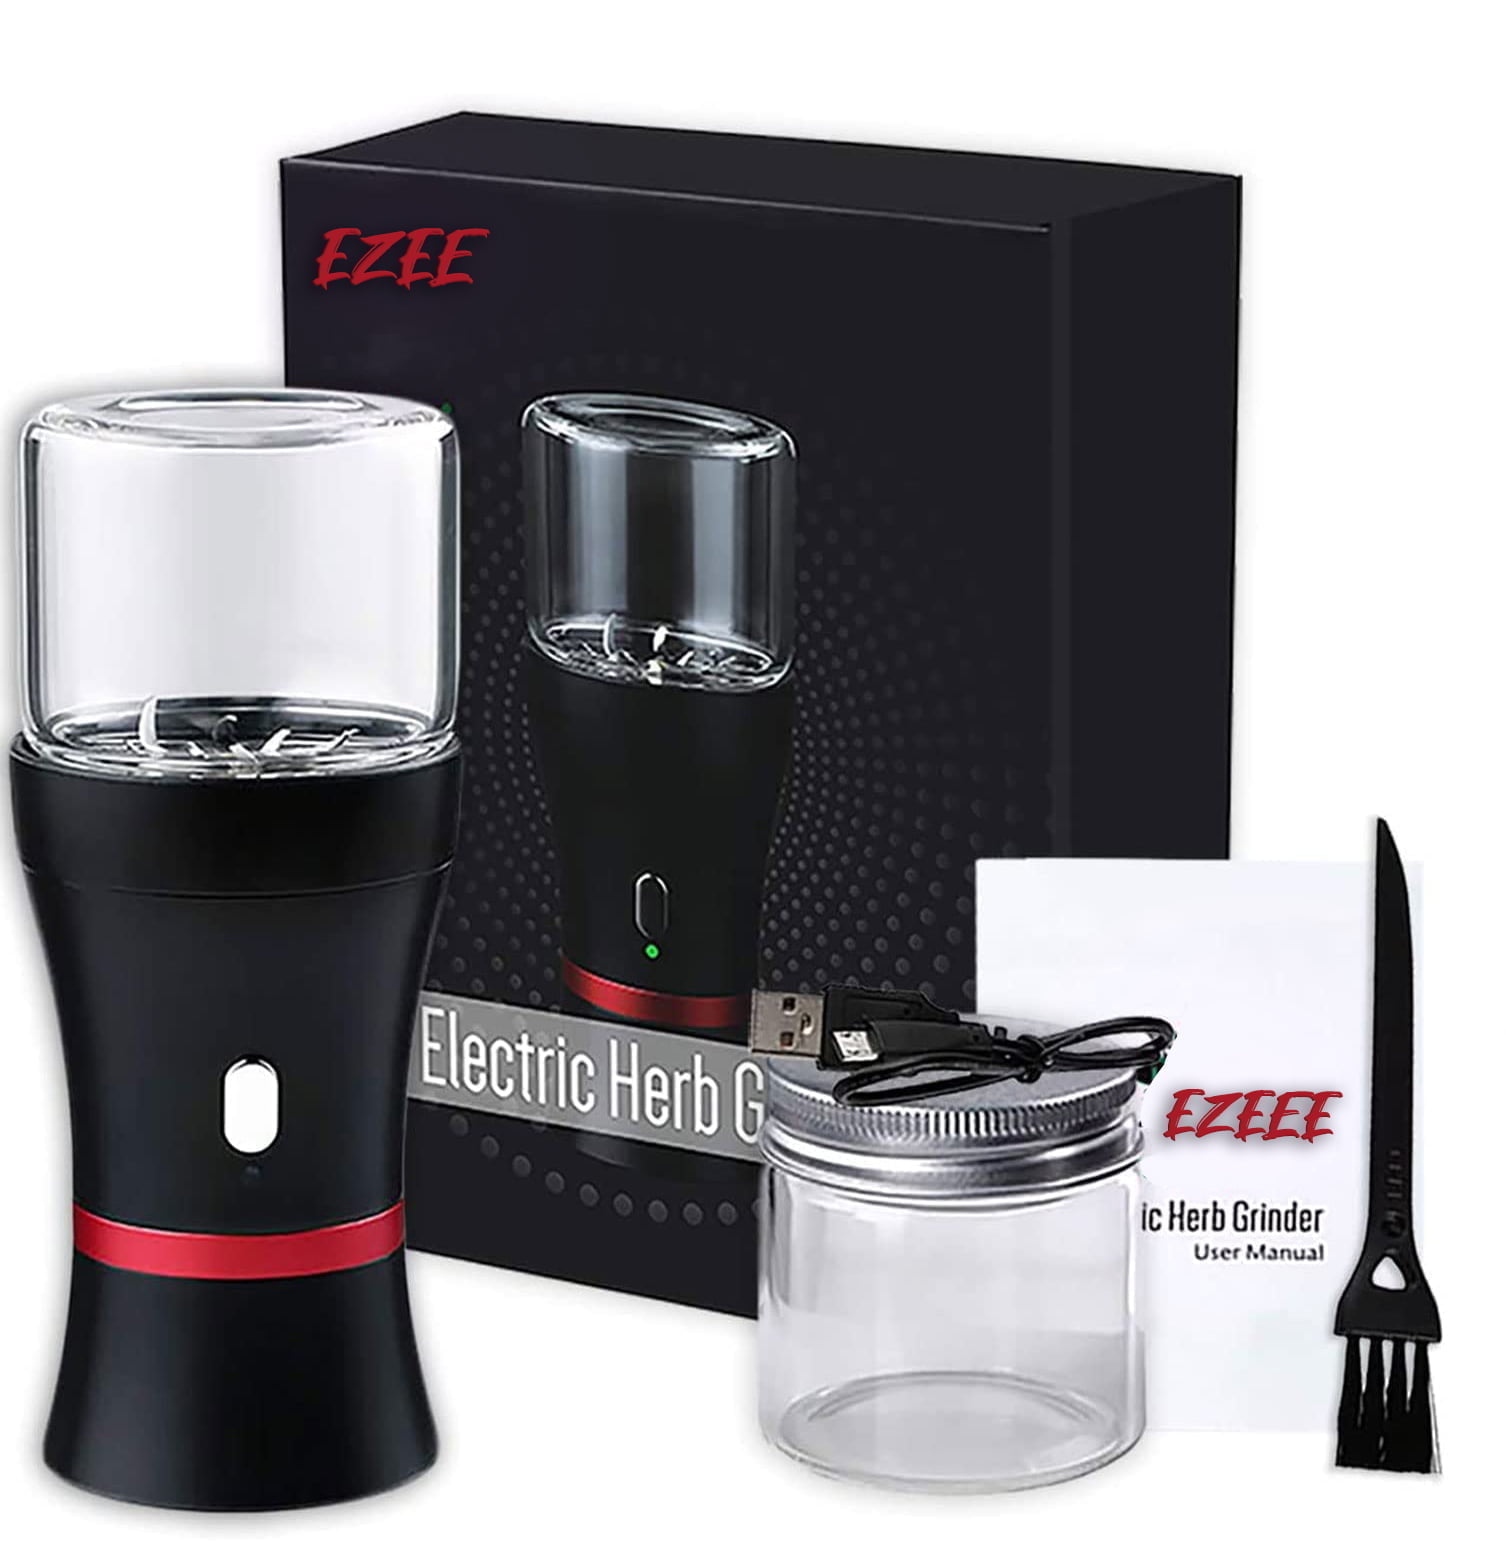 Jouge Intelligent Electric Sifter Grinder — TBS Supply Co